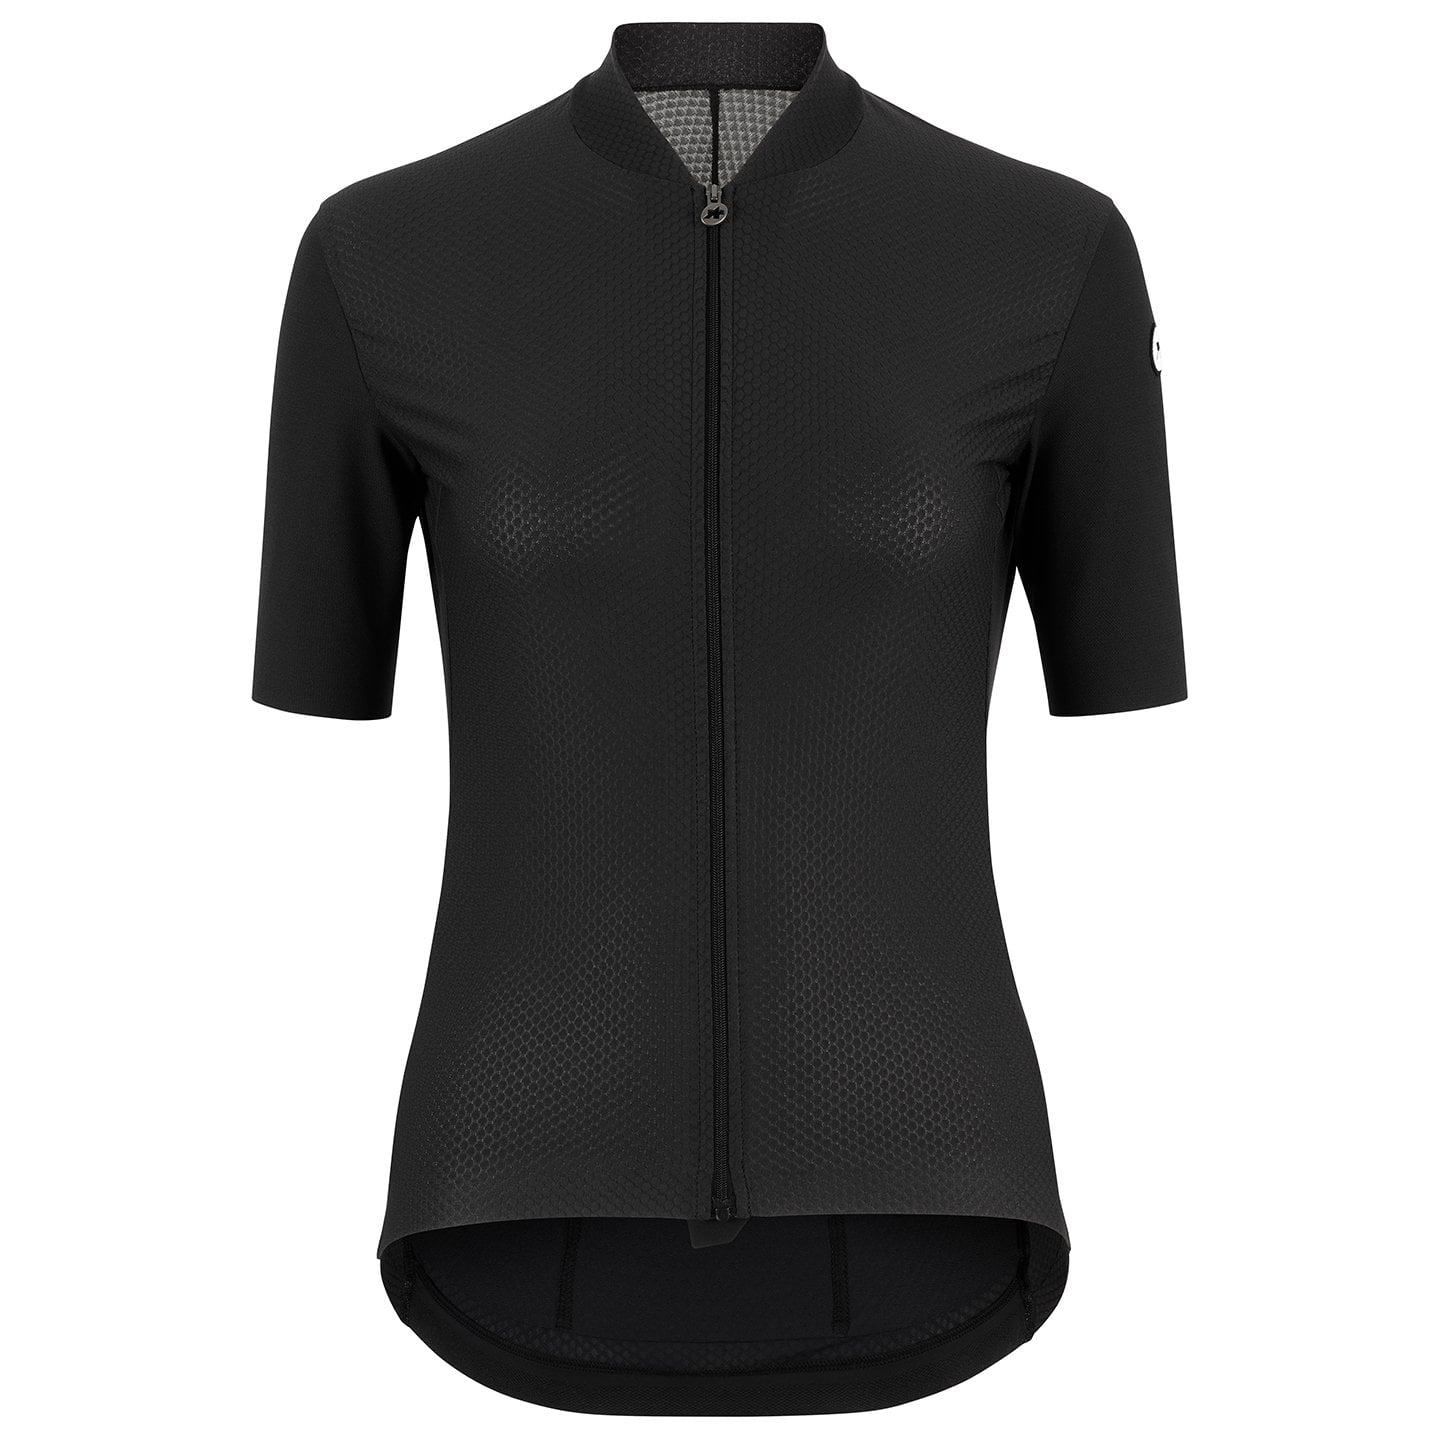 ASSOS Mille GT Drylight S11 Women’s Short Sleeve Jersey, size M, Cycling jersey, Cycle clothing